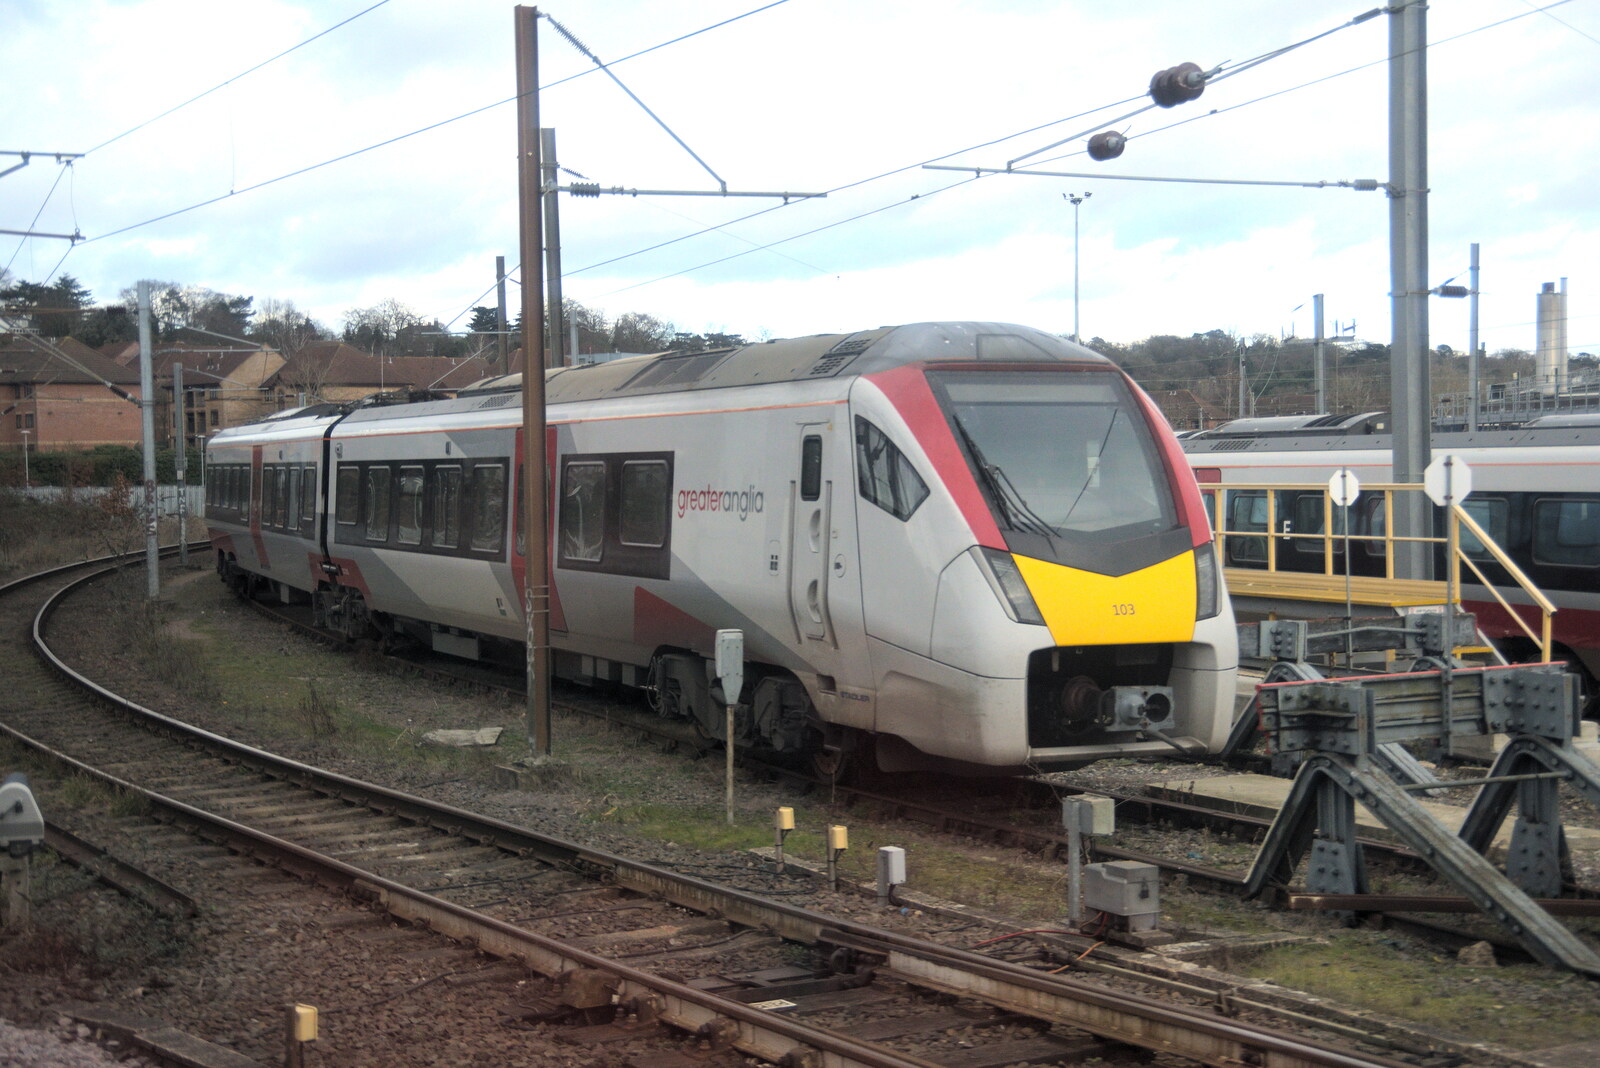 A Trip to the Odeon Cinema, Riverside, Norwich - 29th January 2022: A Class 745/0 Stadler Flirt train at Crown Point